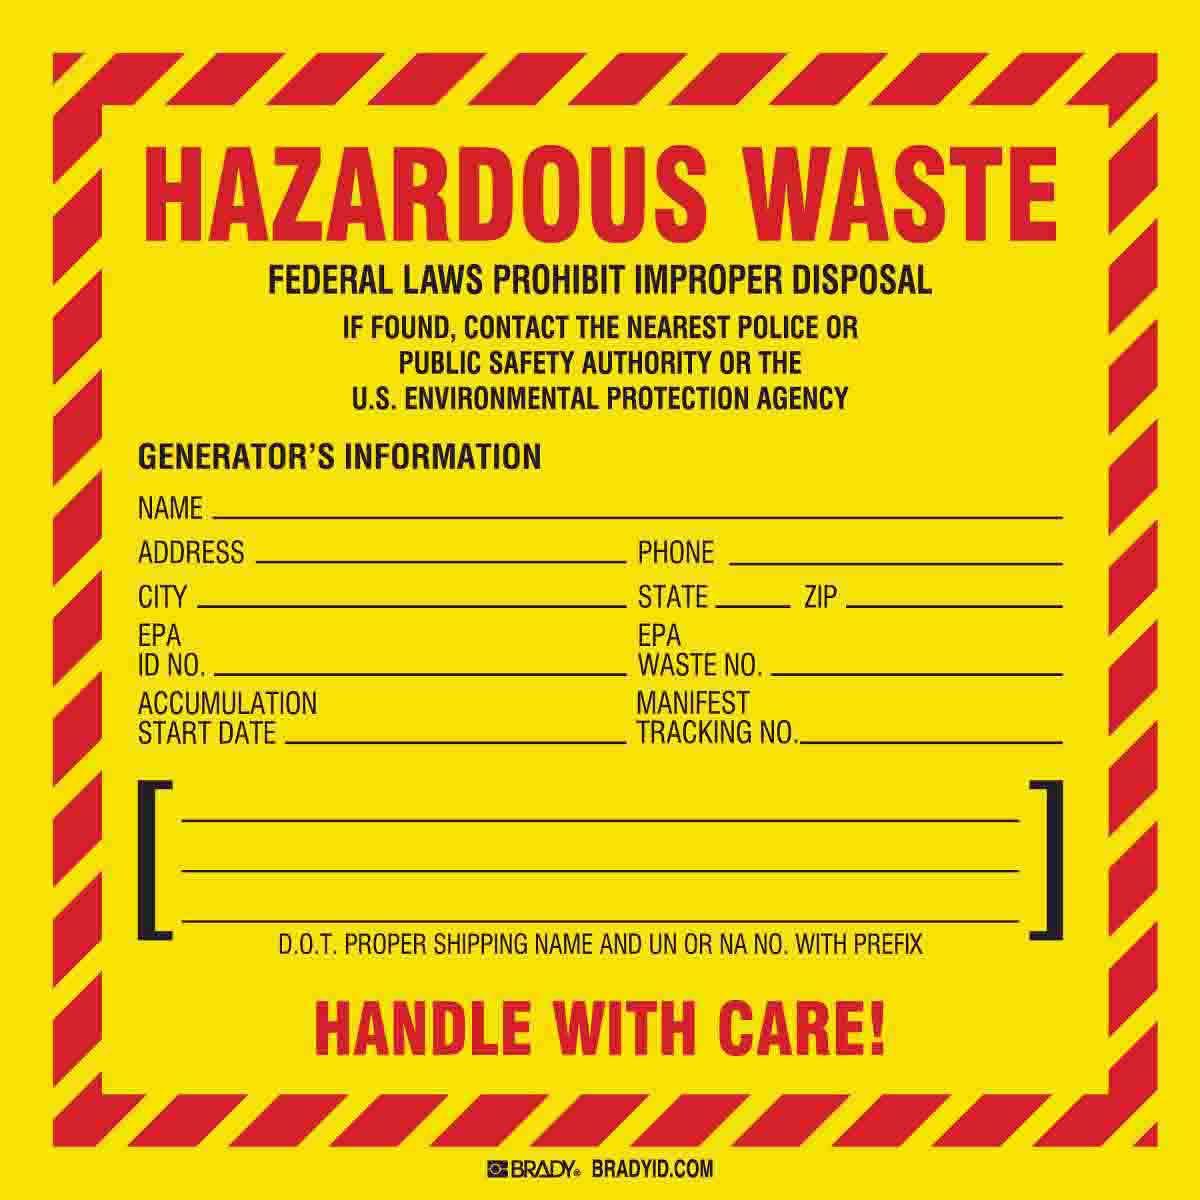 Brady® 121067 Diamond Non-Reflective Self-Adhesive Hazardous Material Shipping Label, 4 in W, FLAMMABLE LIQUID 3 Legend, Red on White, B-7569 Adhesive Vinyl Film, 500 per Roll Labels